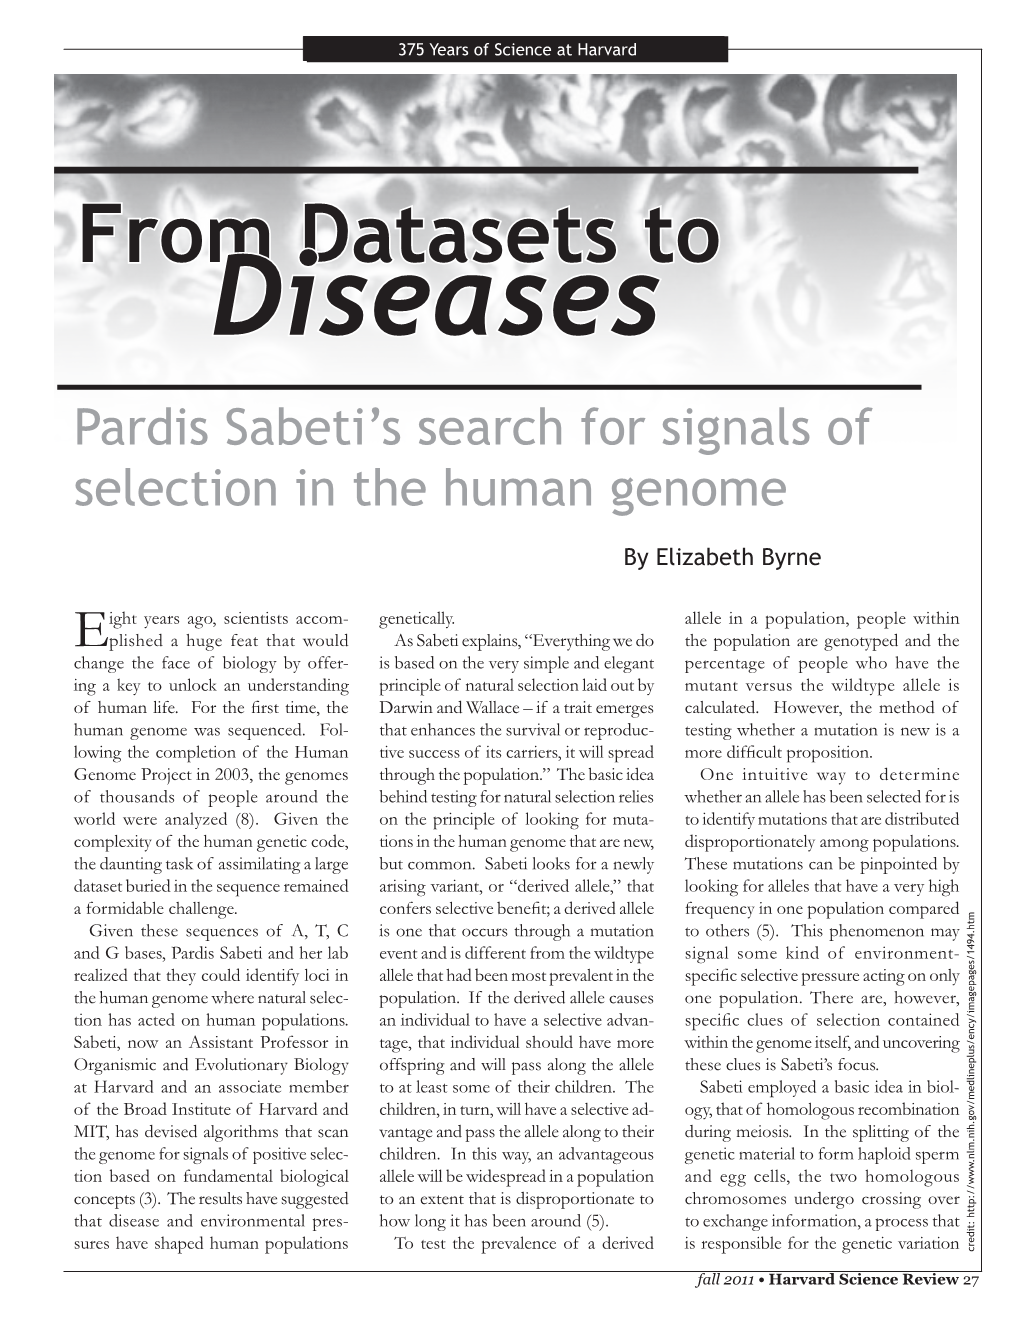 Diseases Pardis Sabeti’S Search for Signals of Selection in the Human Genome